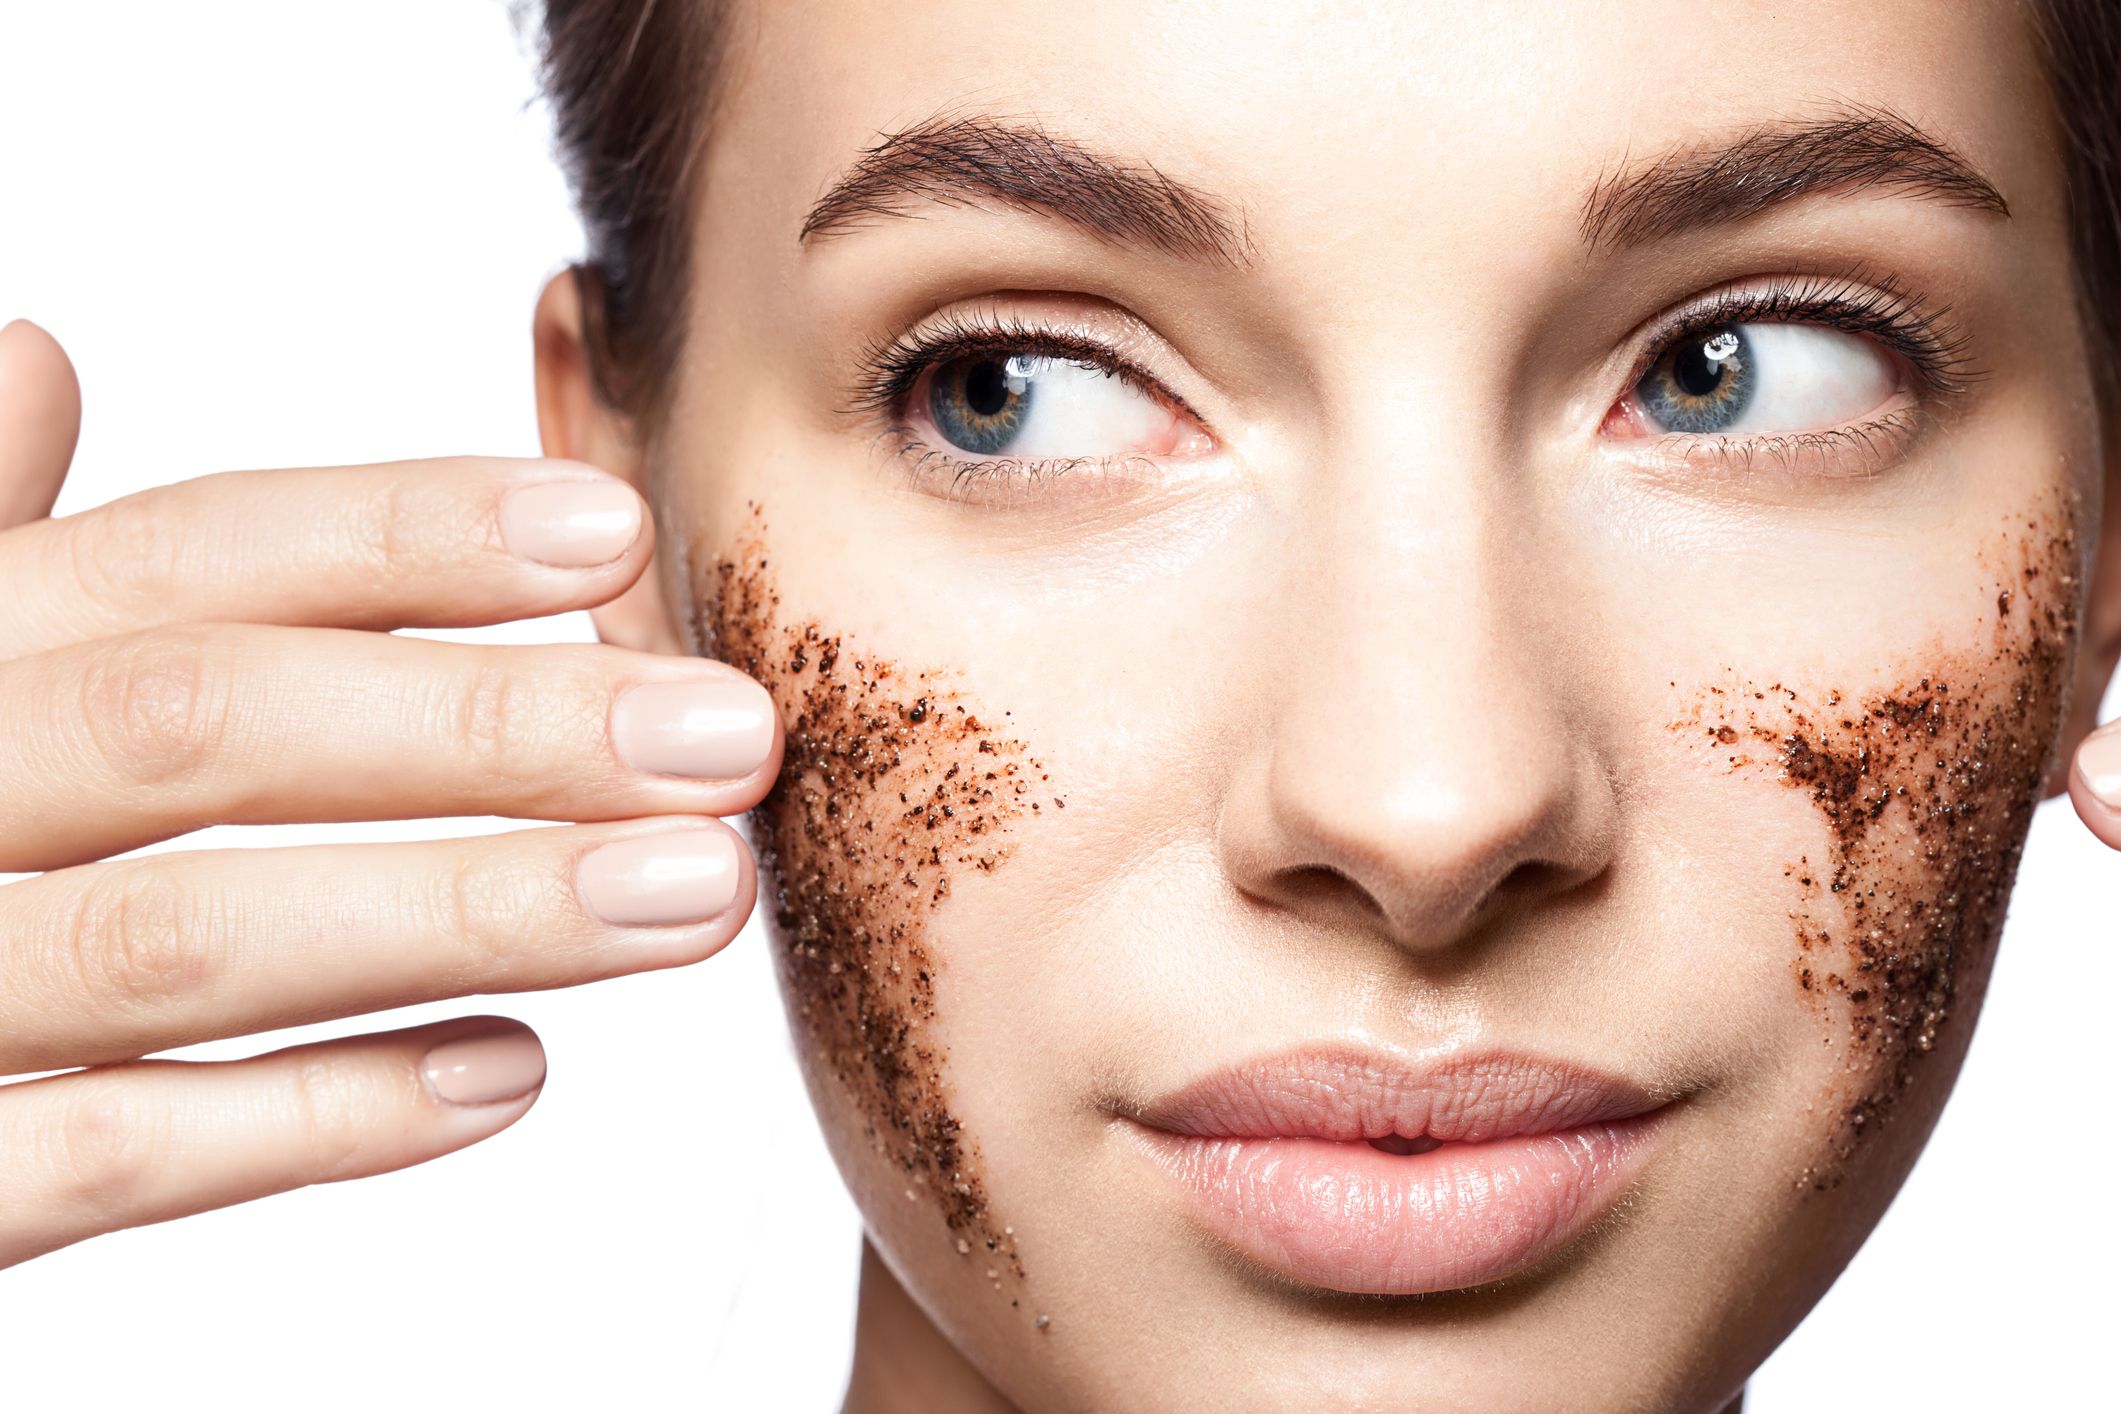 Why Are Chemical Exfoliators Better Than Physical Exfoliators?